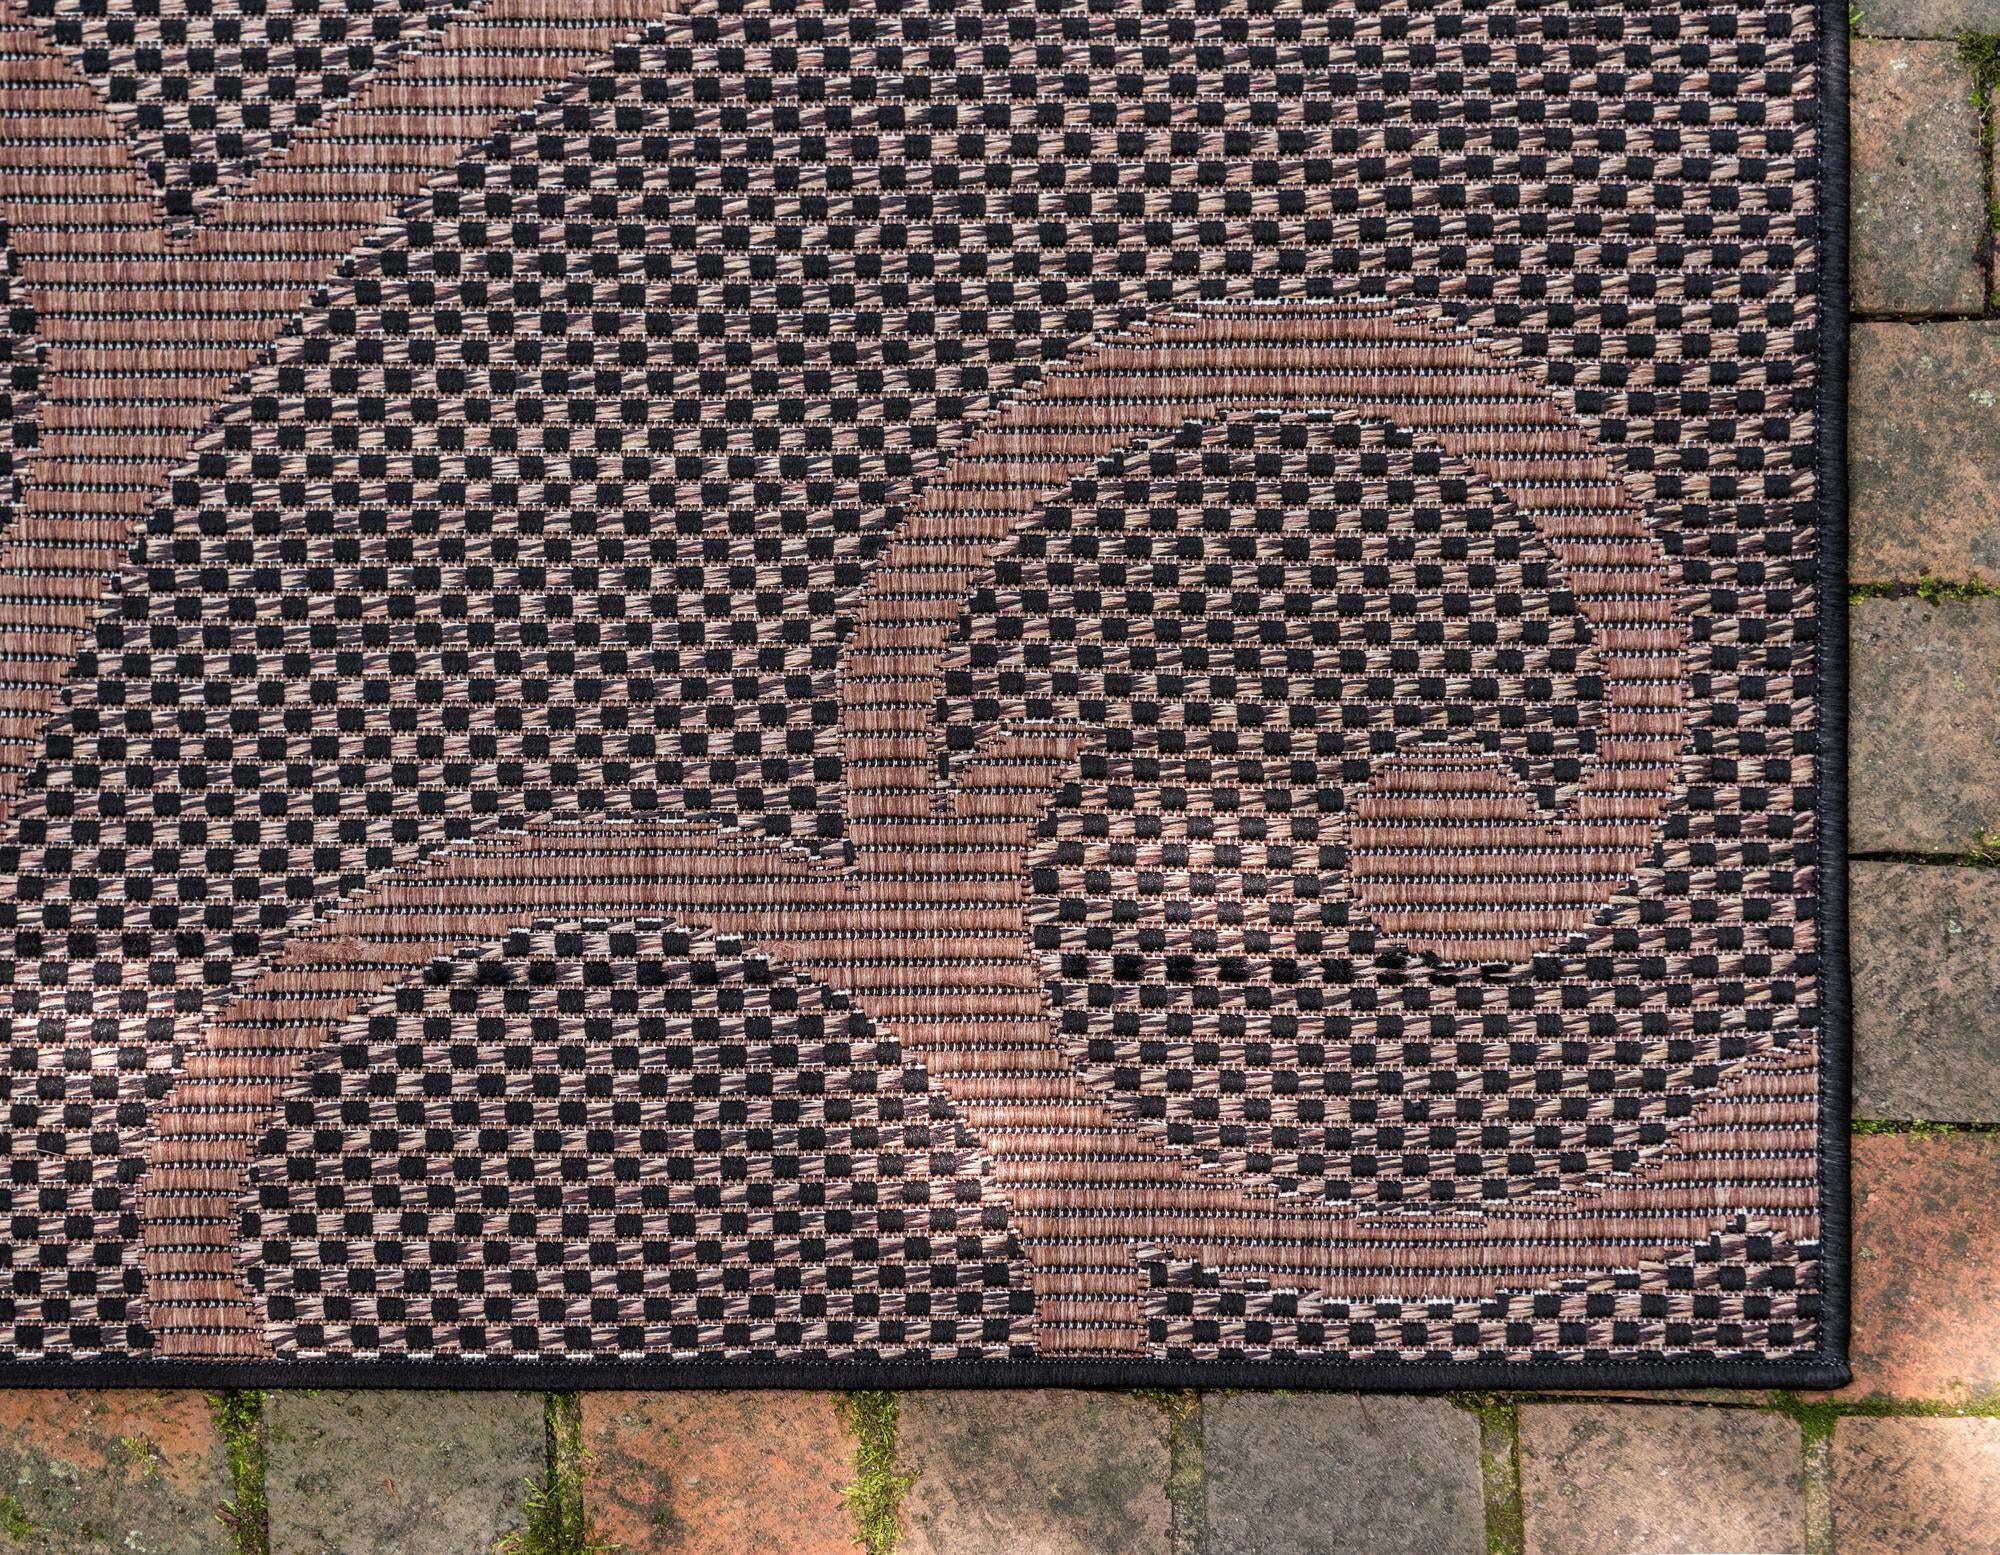 Unique Loom Outdoor Rugs - Outdoor Botanical Damask Rectangular 9x12 Rug Chocolate Brown & Black